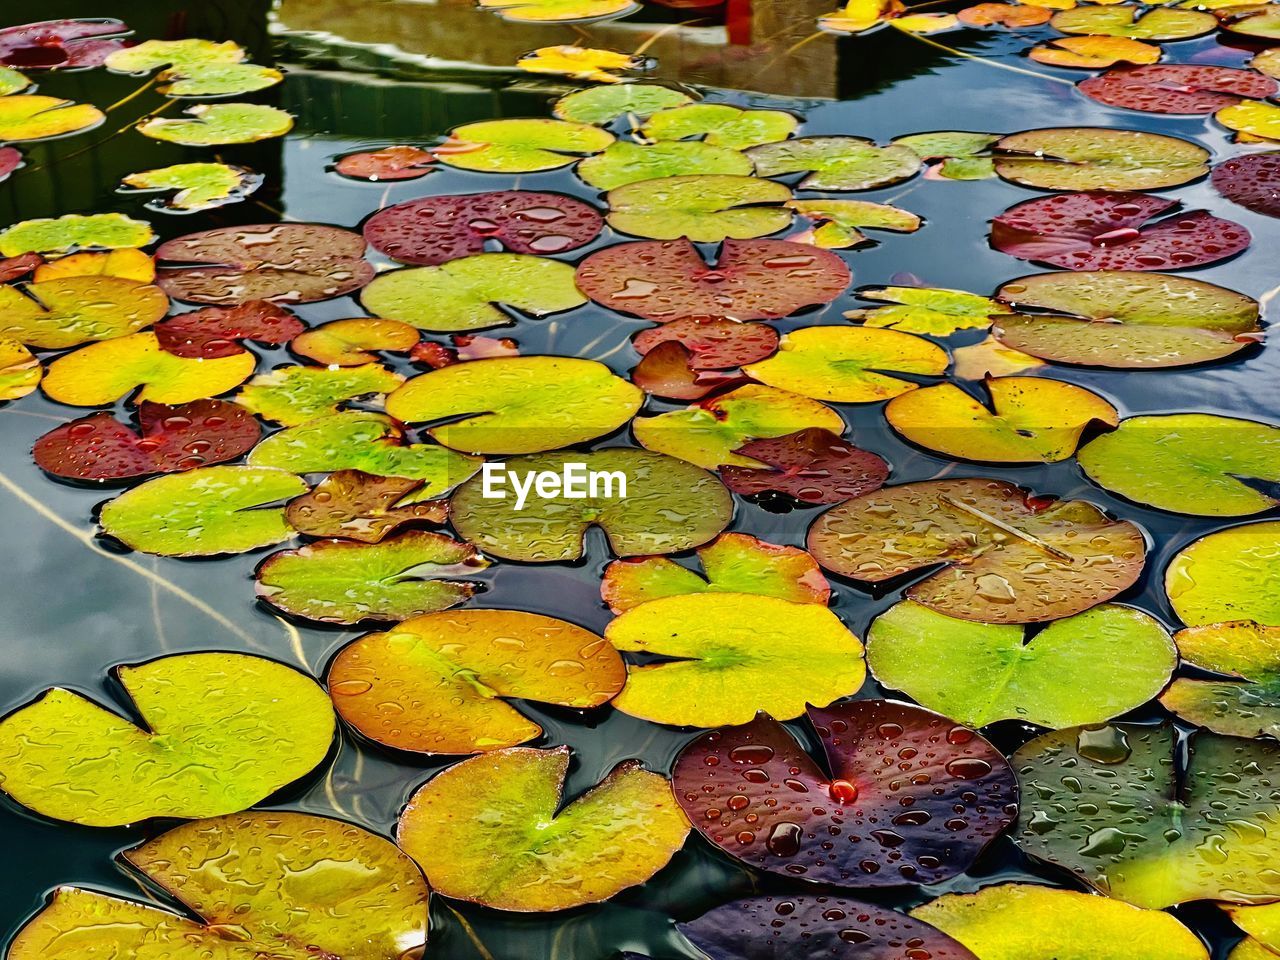 water lily, leaf, floating, water, plant part, pond, floating on water, yellow, nature, no people, high angle view, flower, plant, autumn, beauty in nature, day, lily, leaves, lotus water lily, close-up, outdoors, green, growth, abundance, freshness, multi colored, tranquility, large group of objects